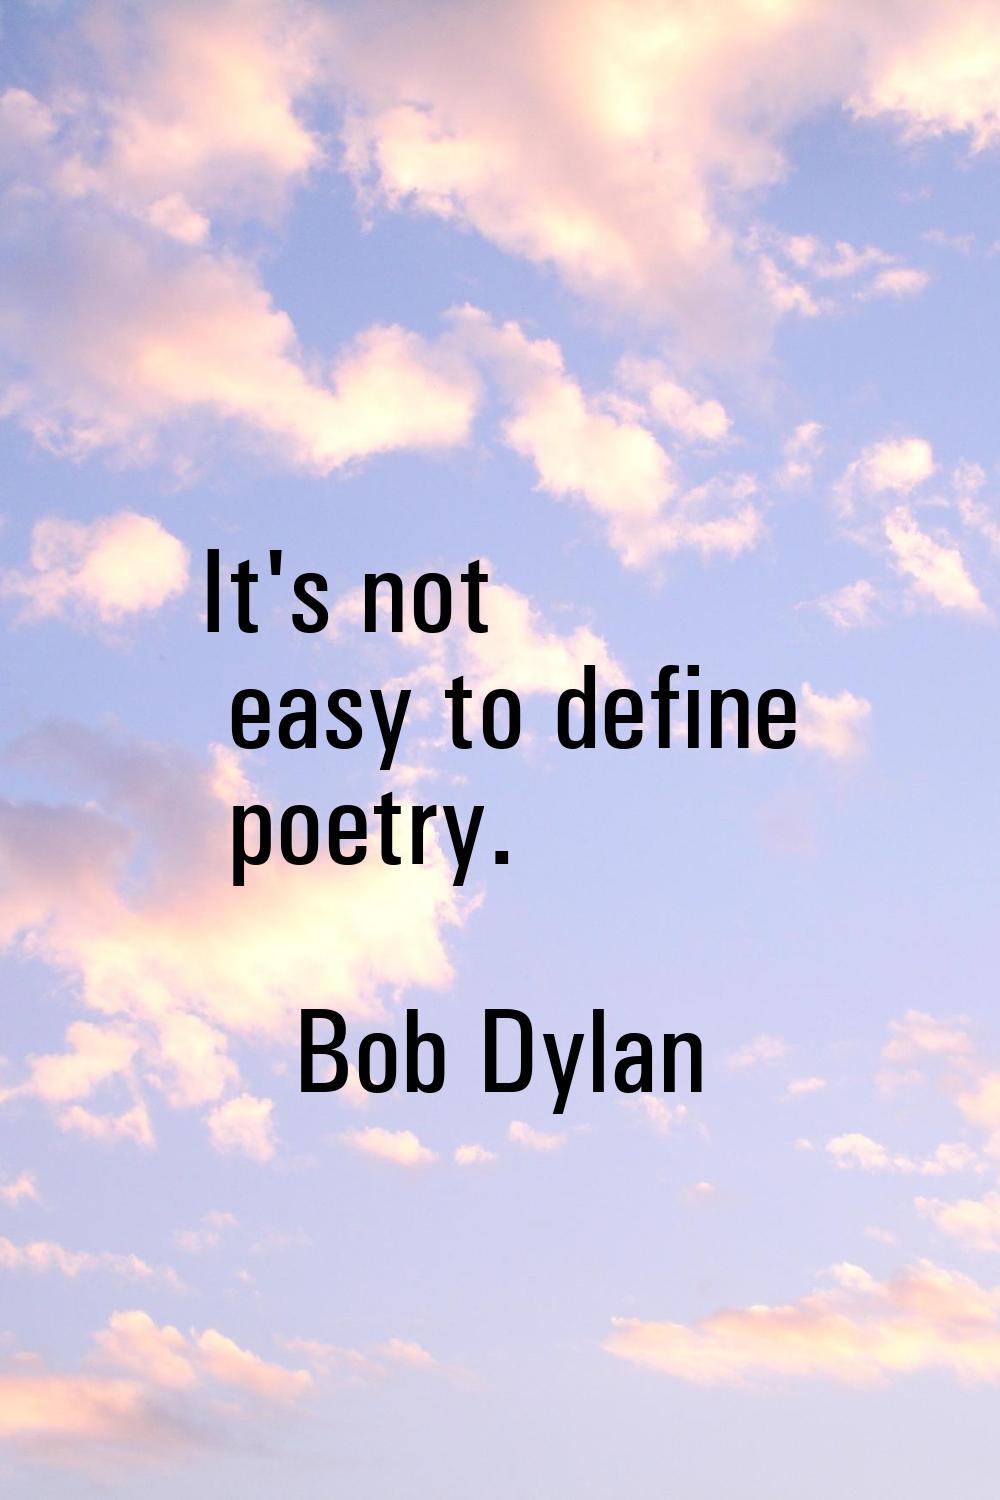 It's not easy to define poetry.